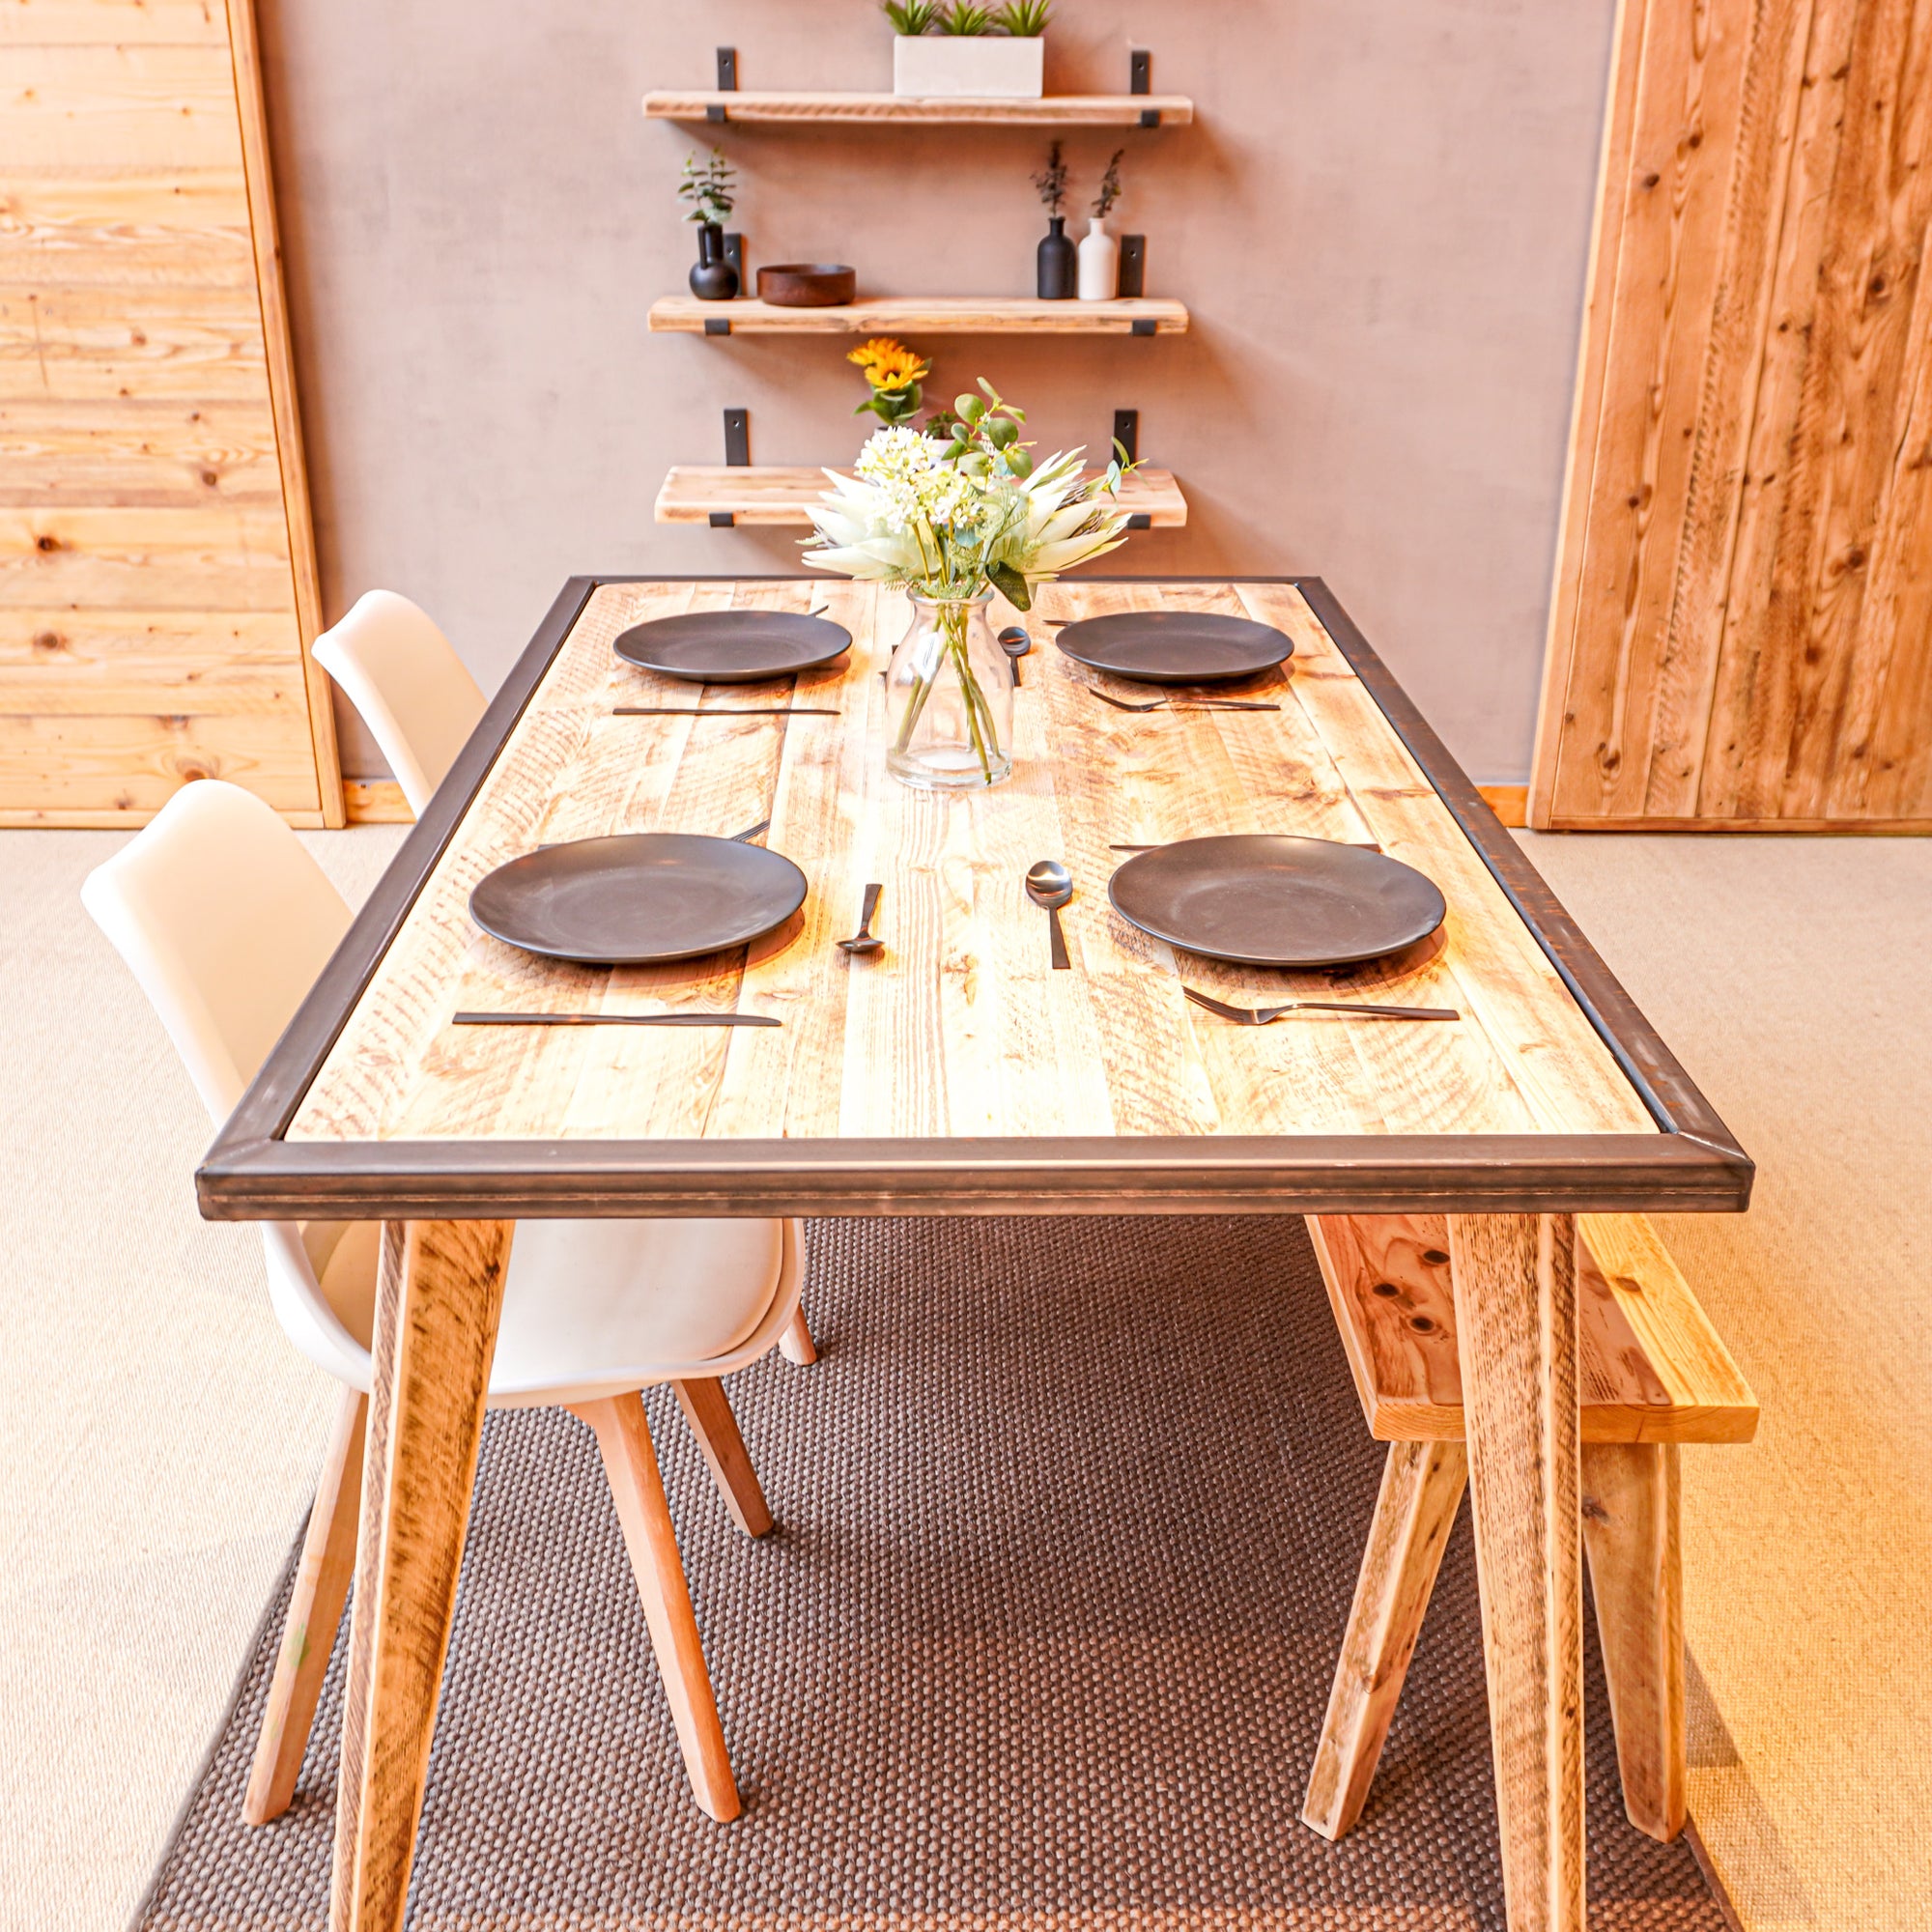 Reclaimed Scaffold Board Dining Table Top - All sizes